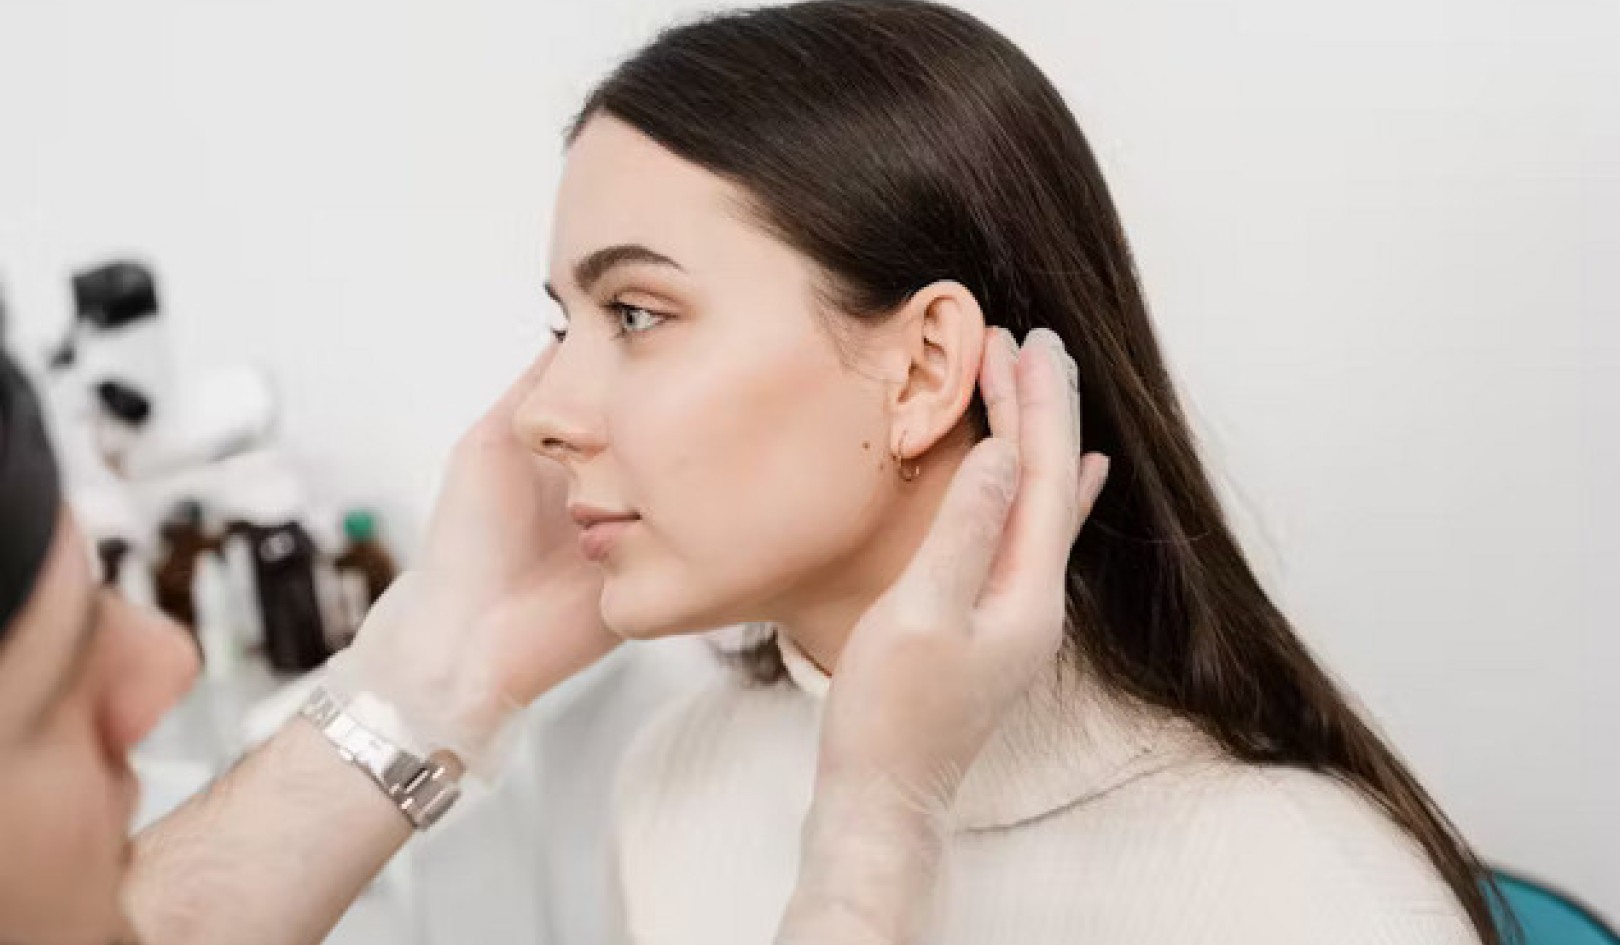 What Your Ears Reveal About Your Health and Lifestyle